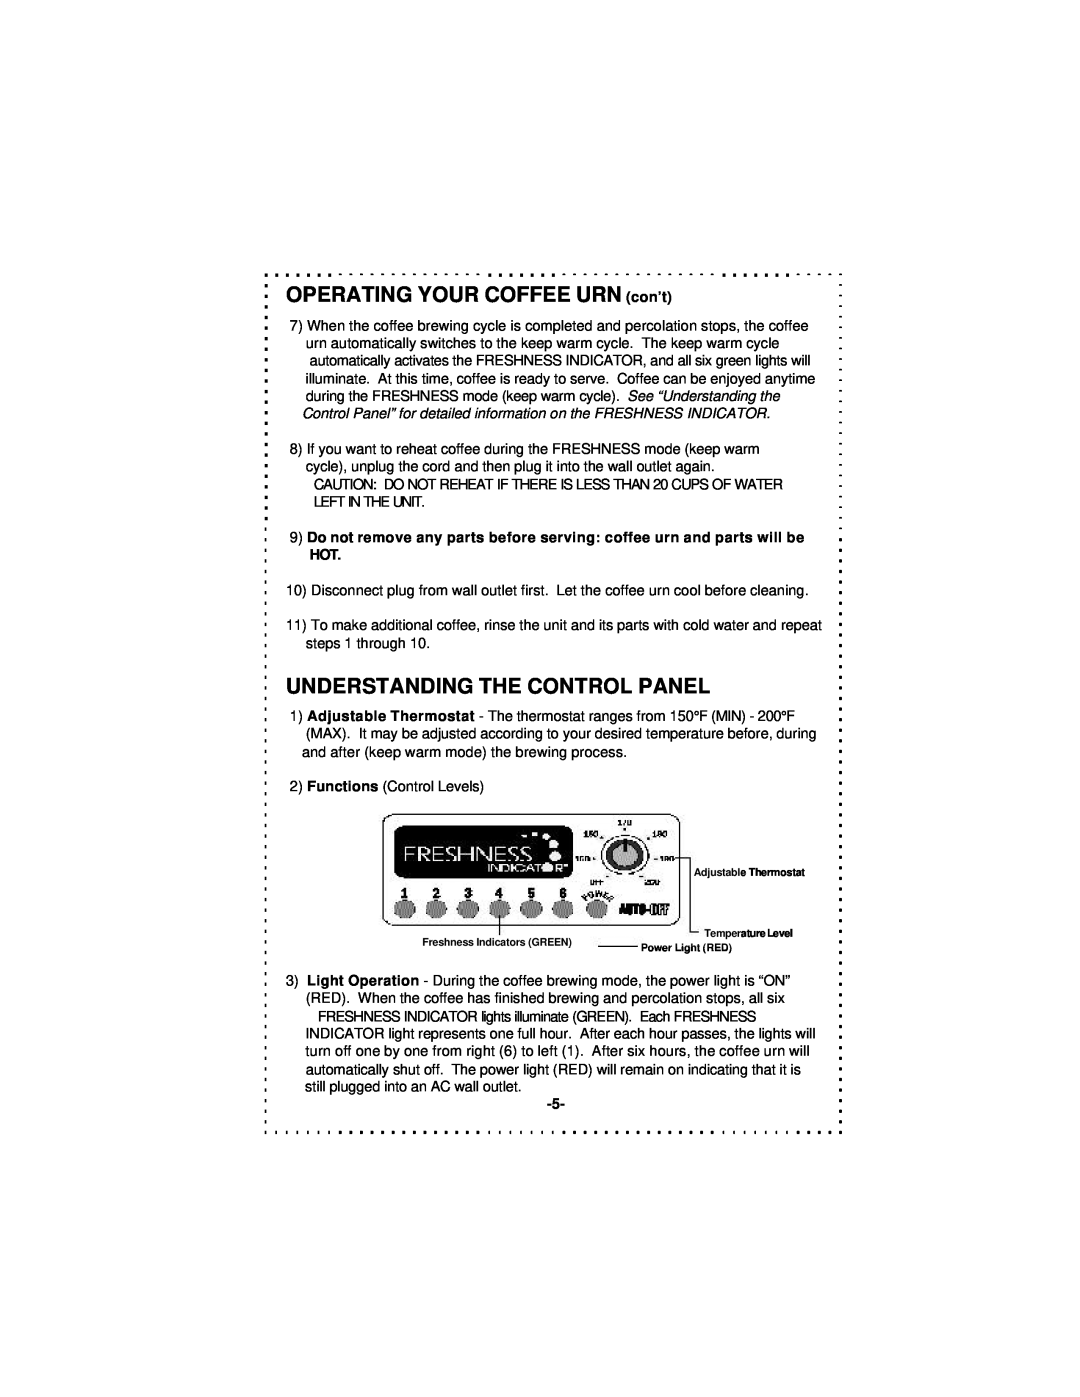 DeLonghi DCU50T Series instruction manual OPERATING YOUR COFFEE URN con’t, Understanding The Control Panel 